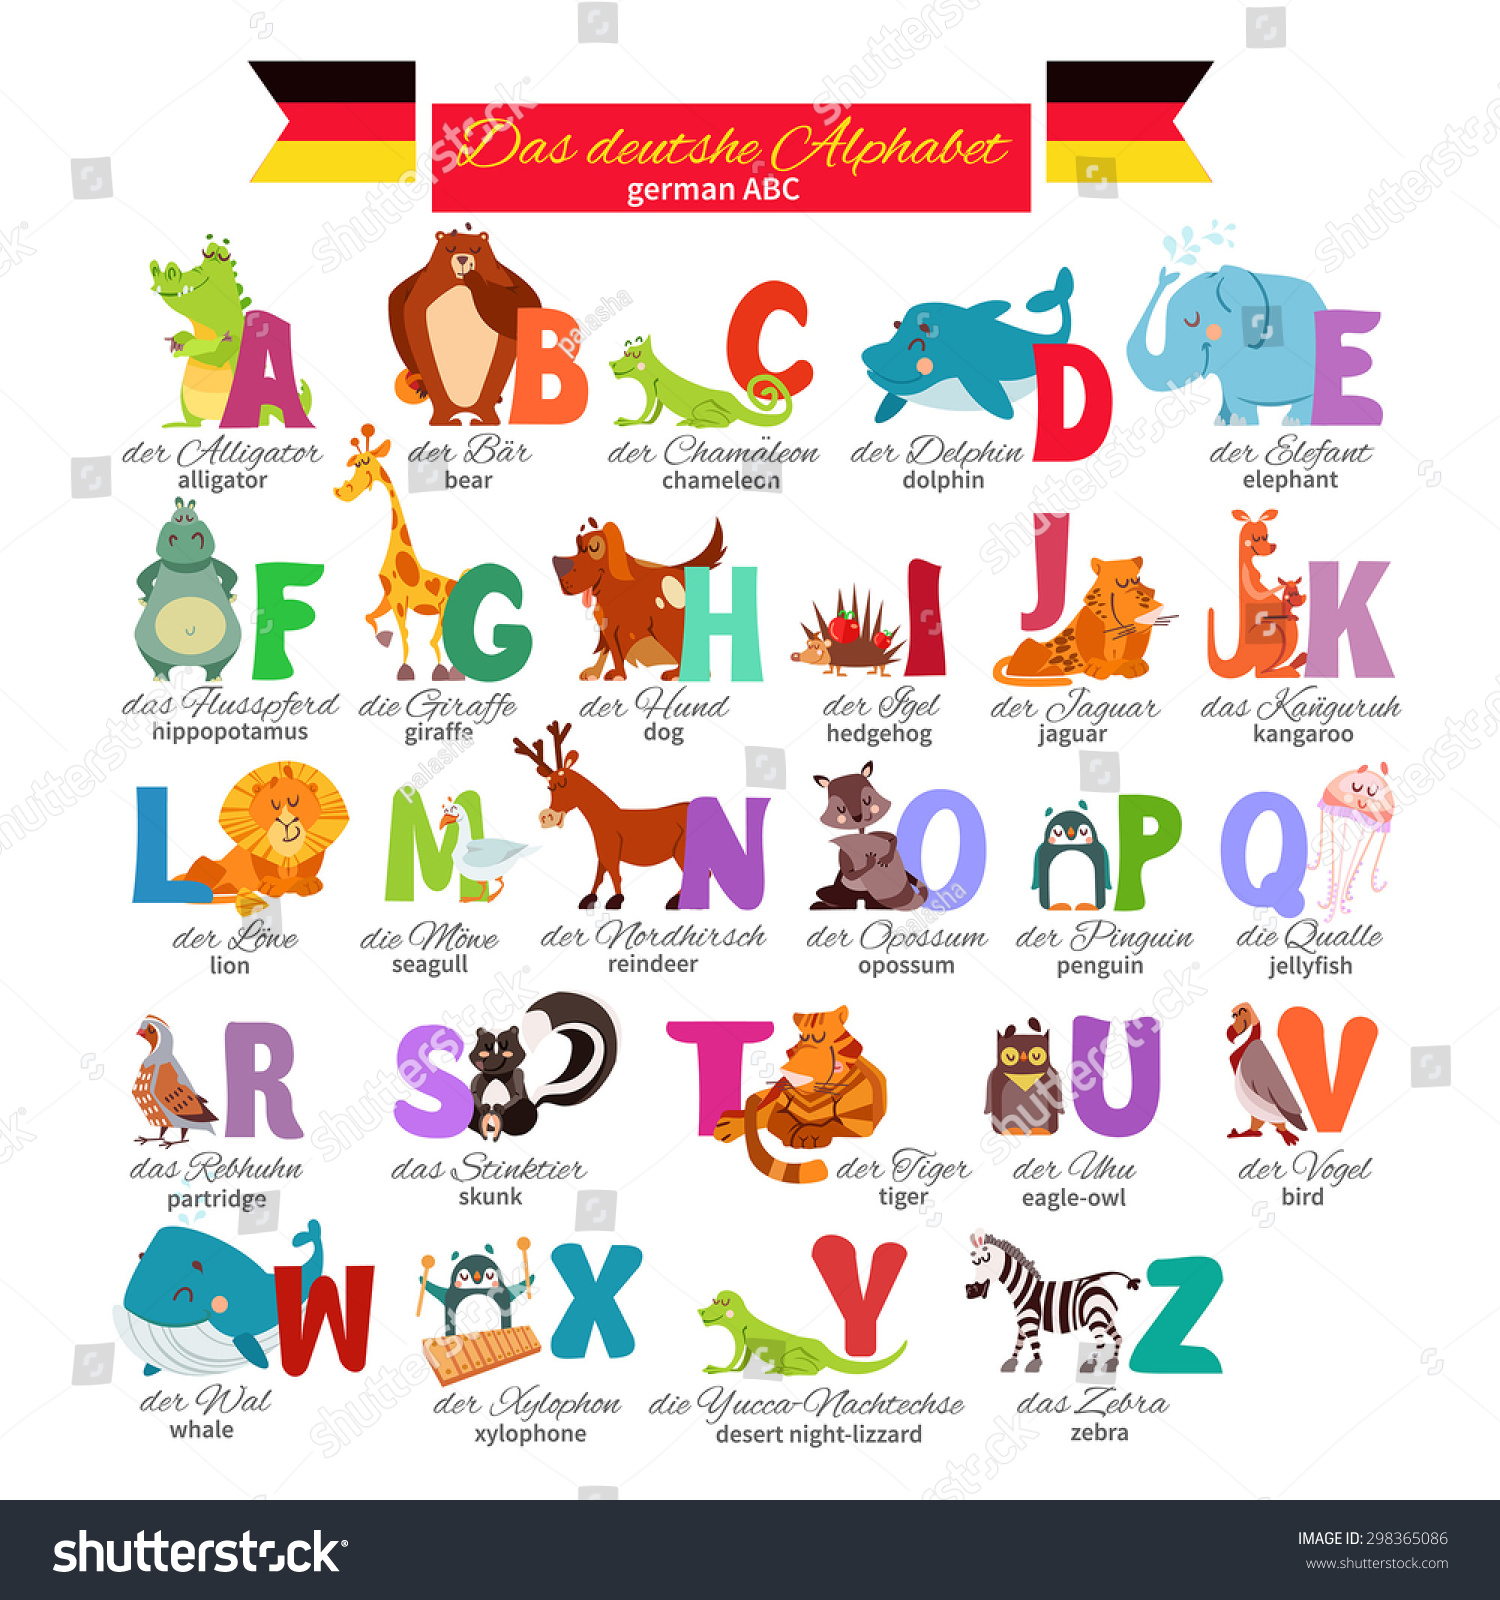 learn german picture dictionary